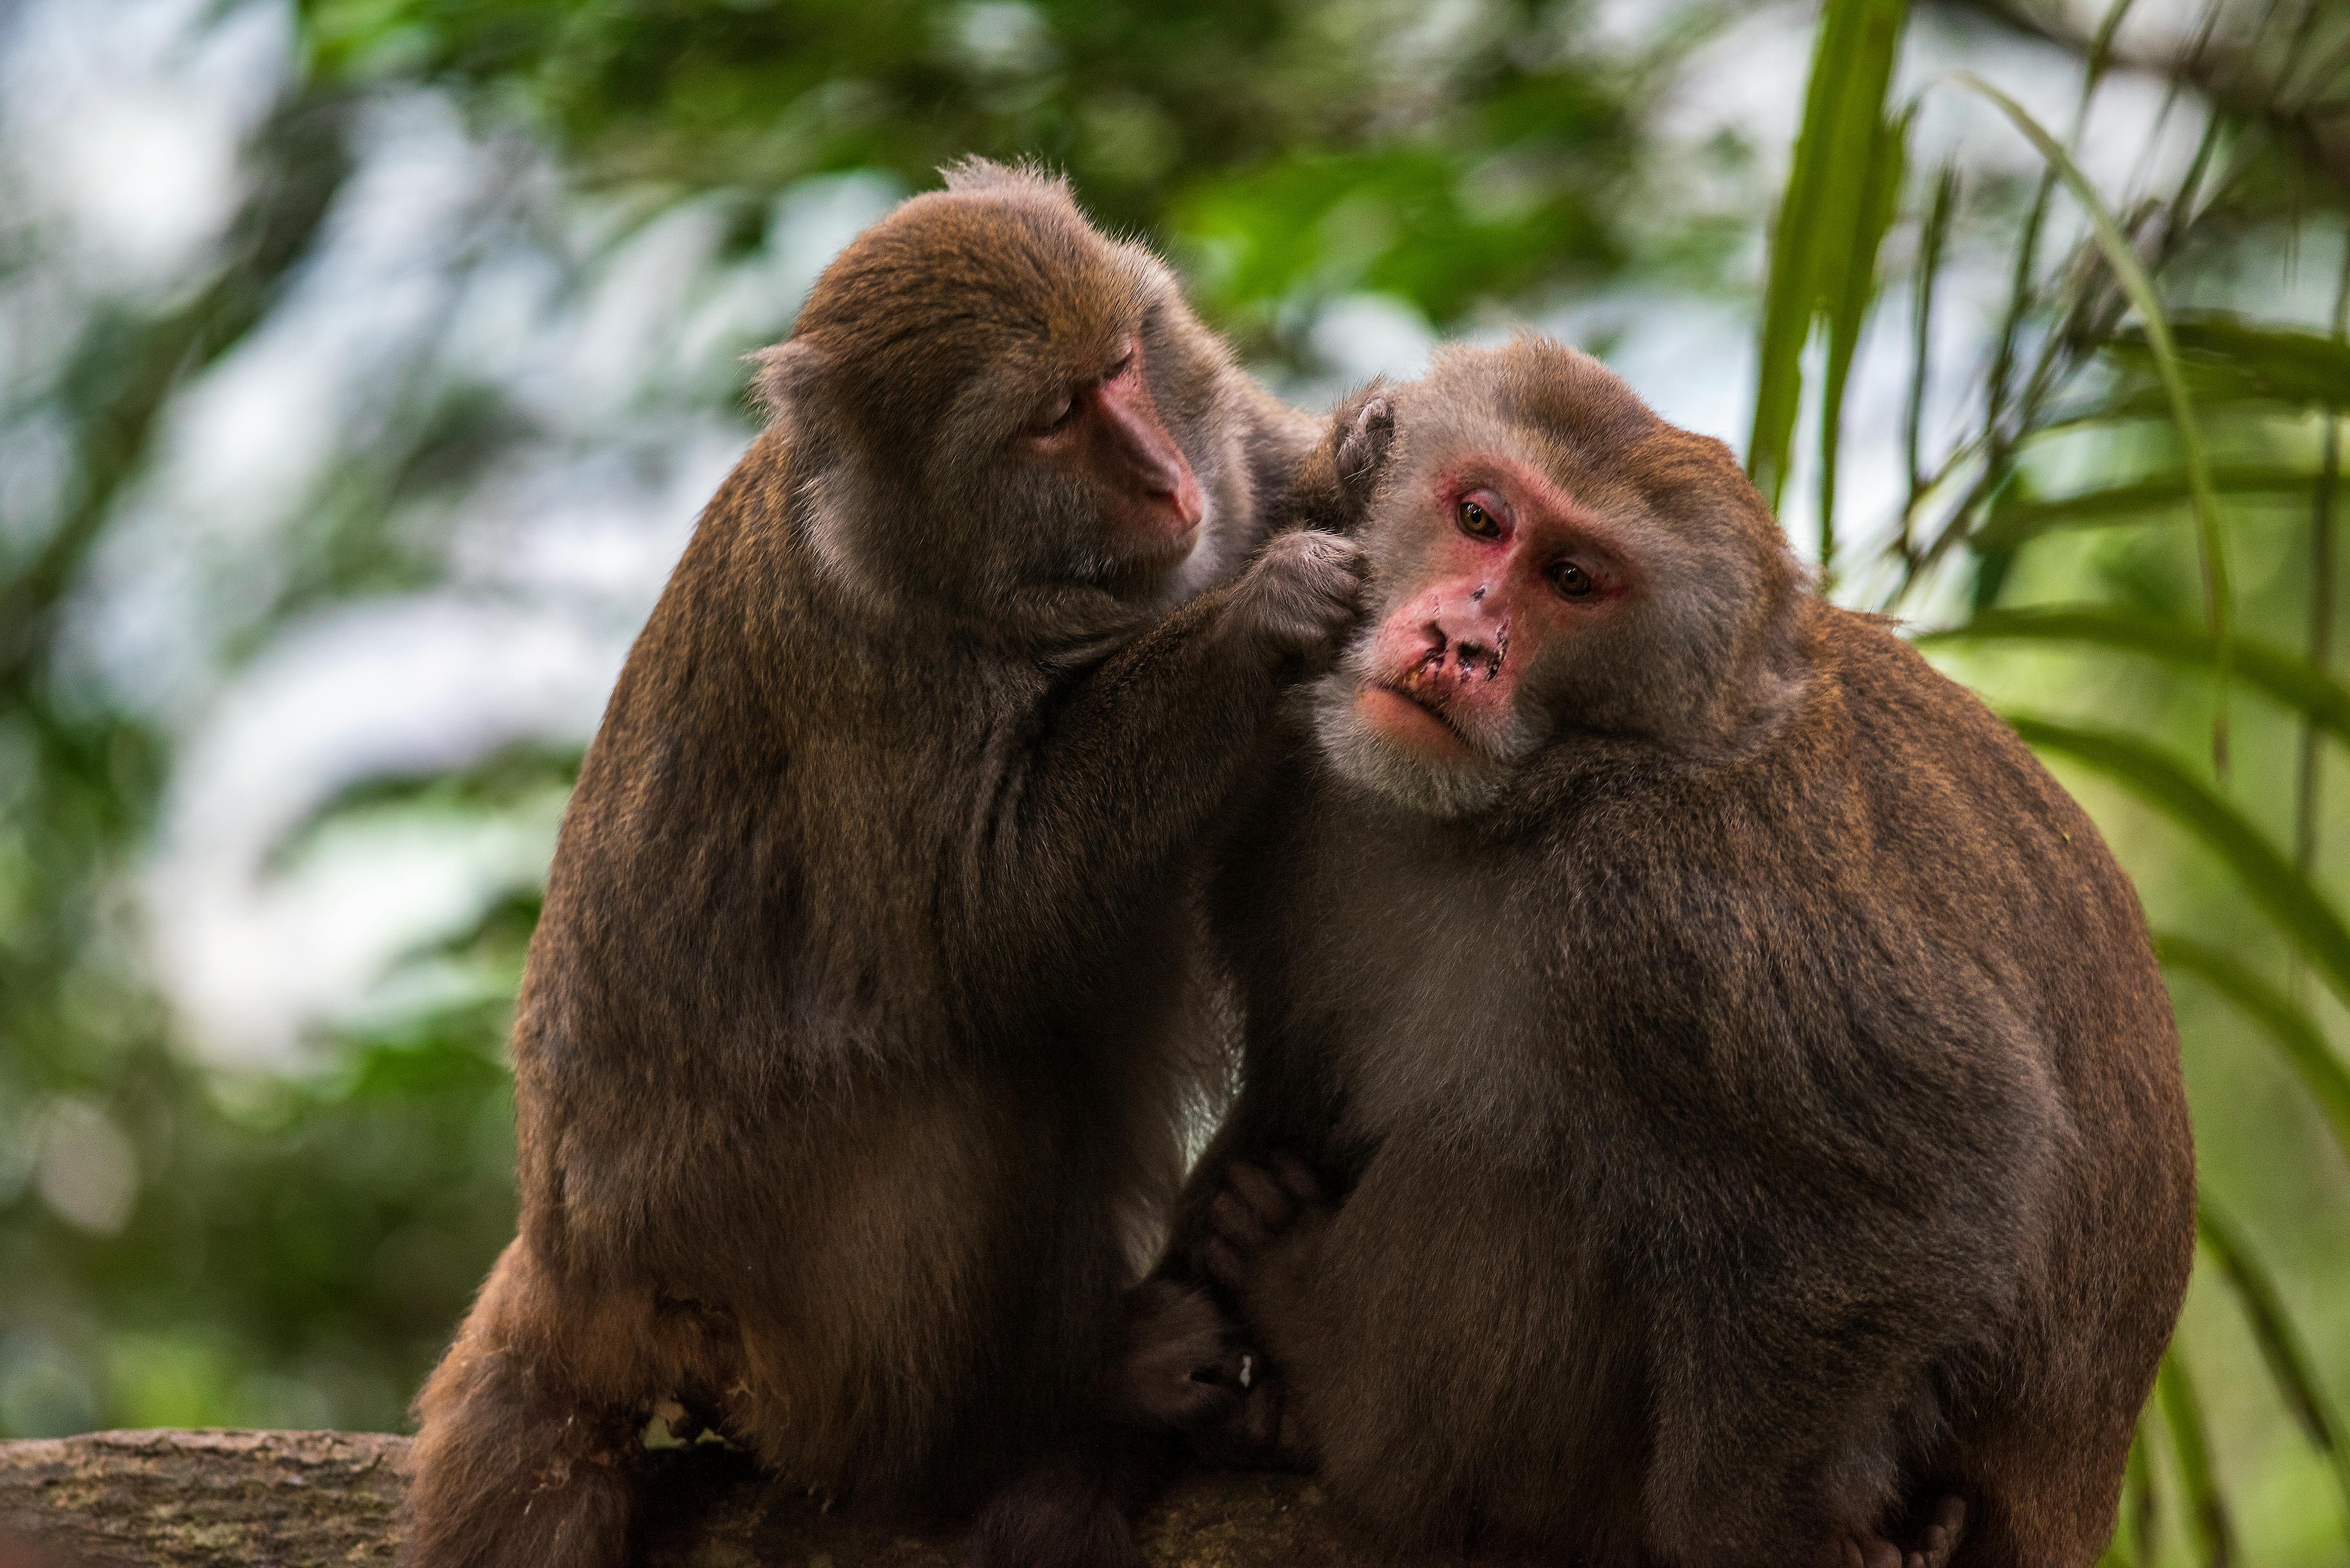 14 Fascinating Facts About Monkeys